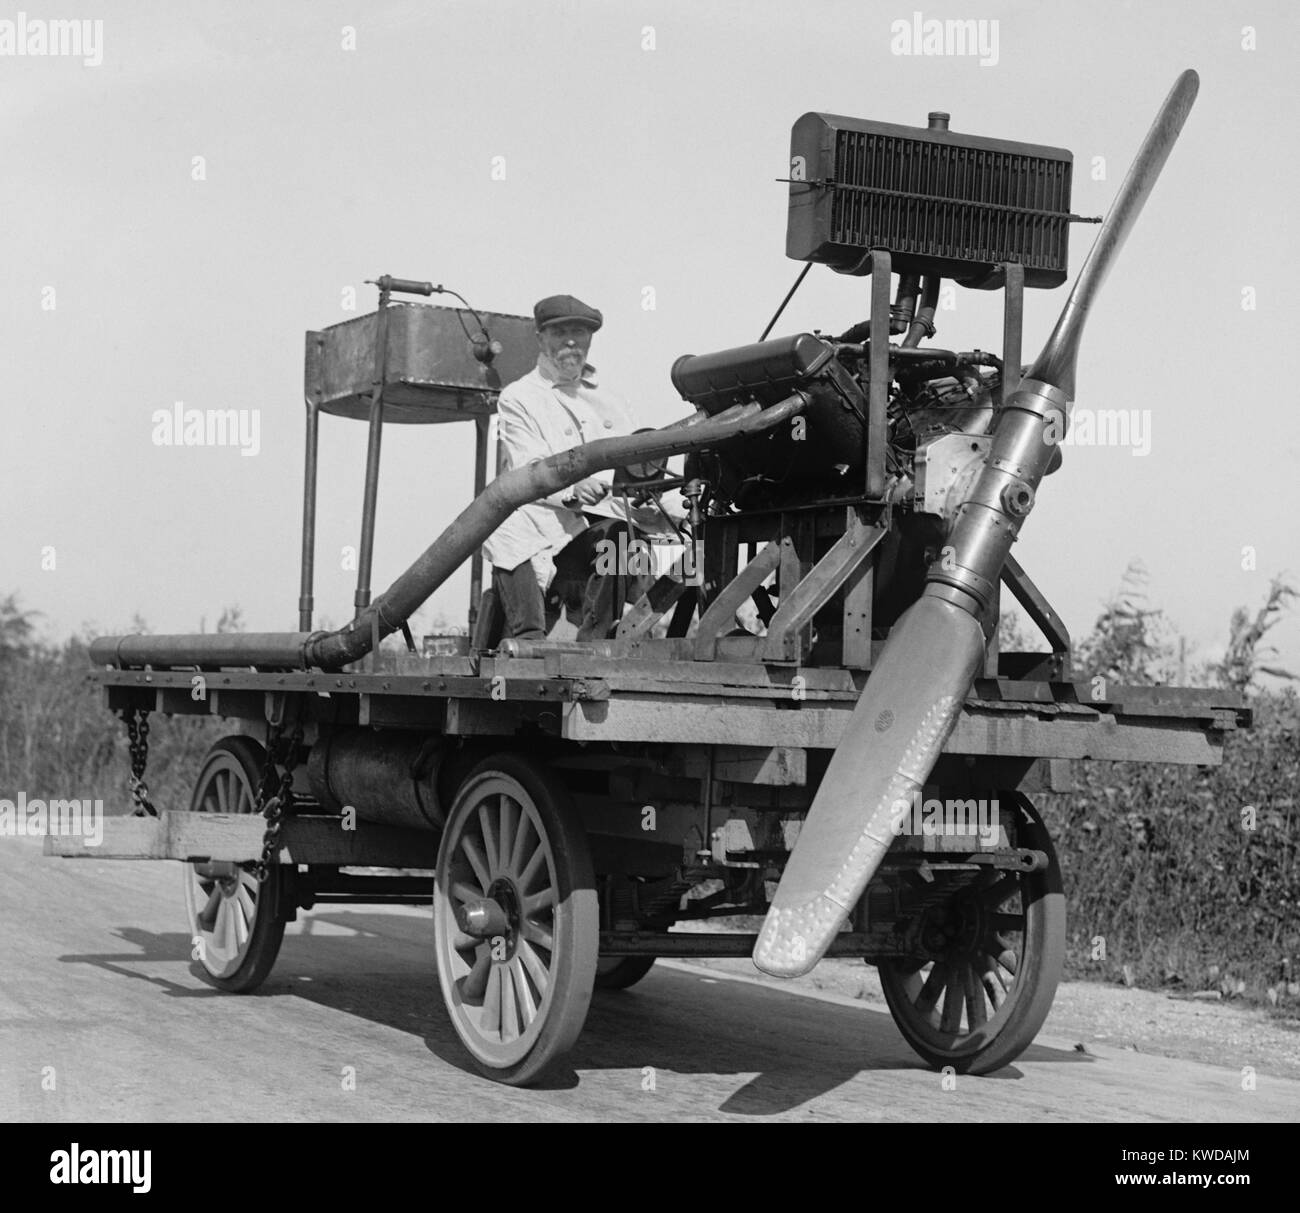 Man on wheeled vehicle with mounted propeller, in Washington, D.C. vicinity, Oct. 11, 1922 (BSLOC 2016 10 132) Stock Photo